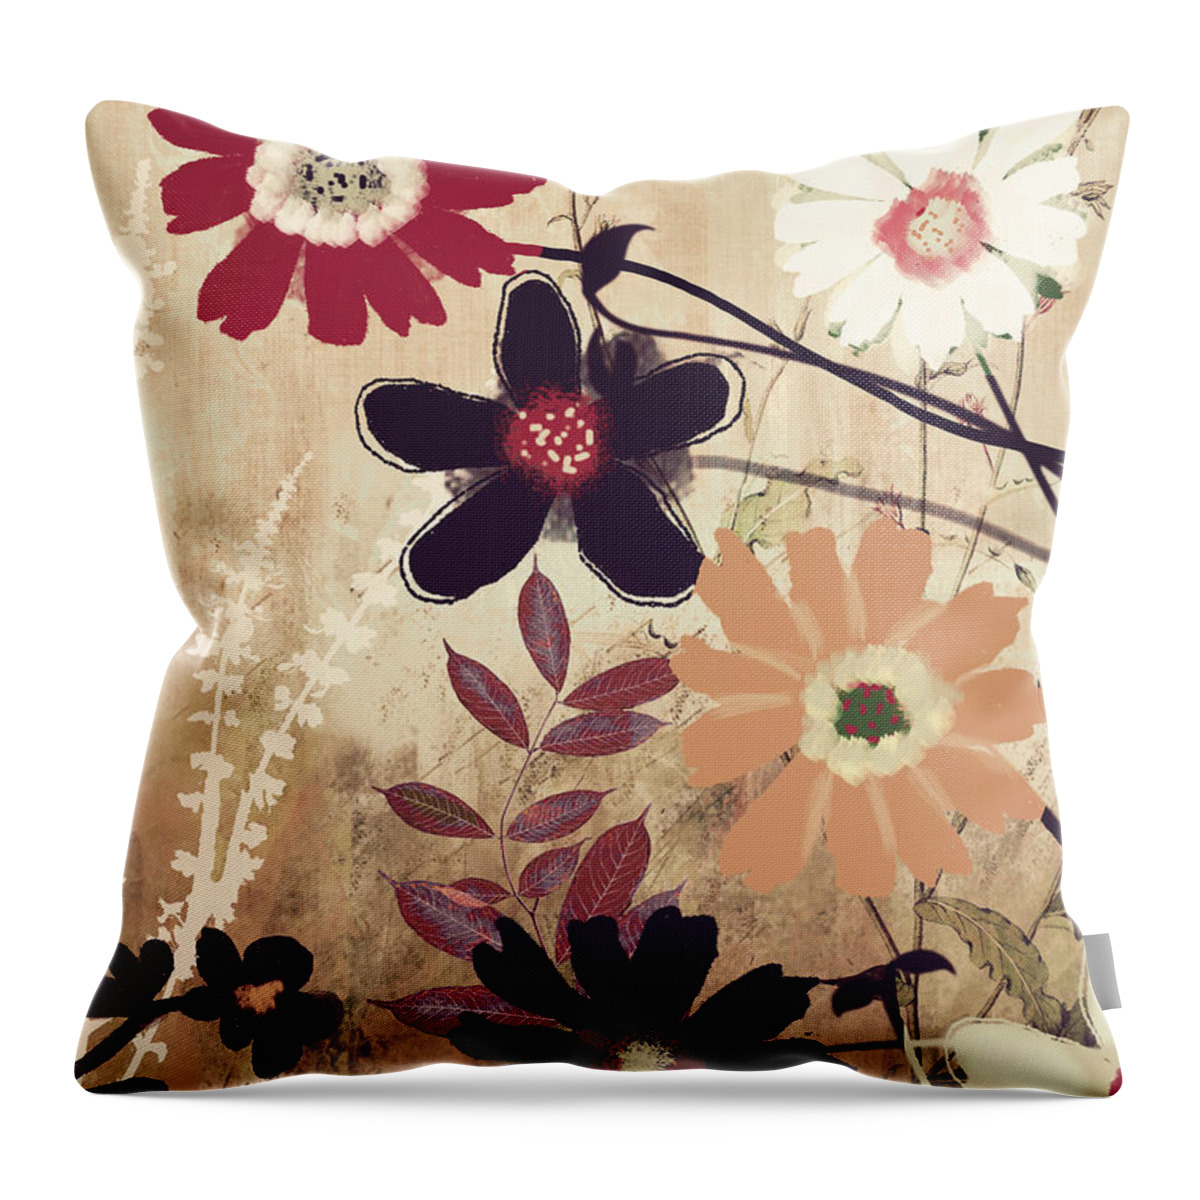 Flowers Throw Pillow featuring the painting Emerge by Mindy Sommers